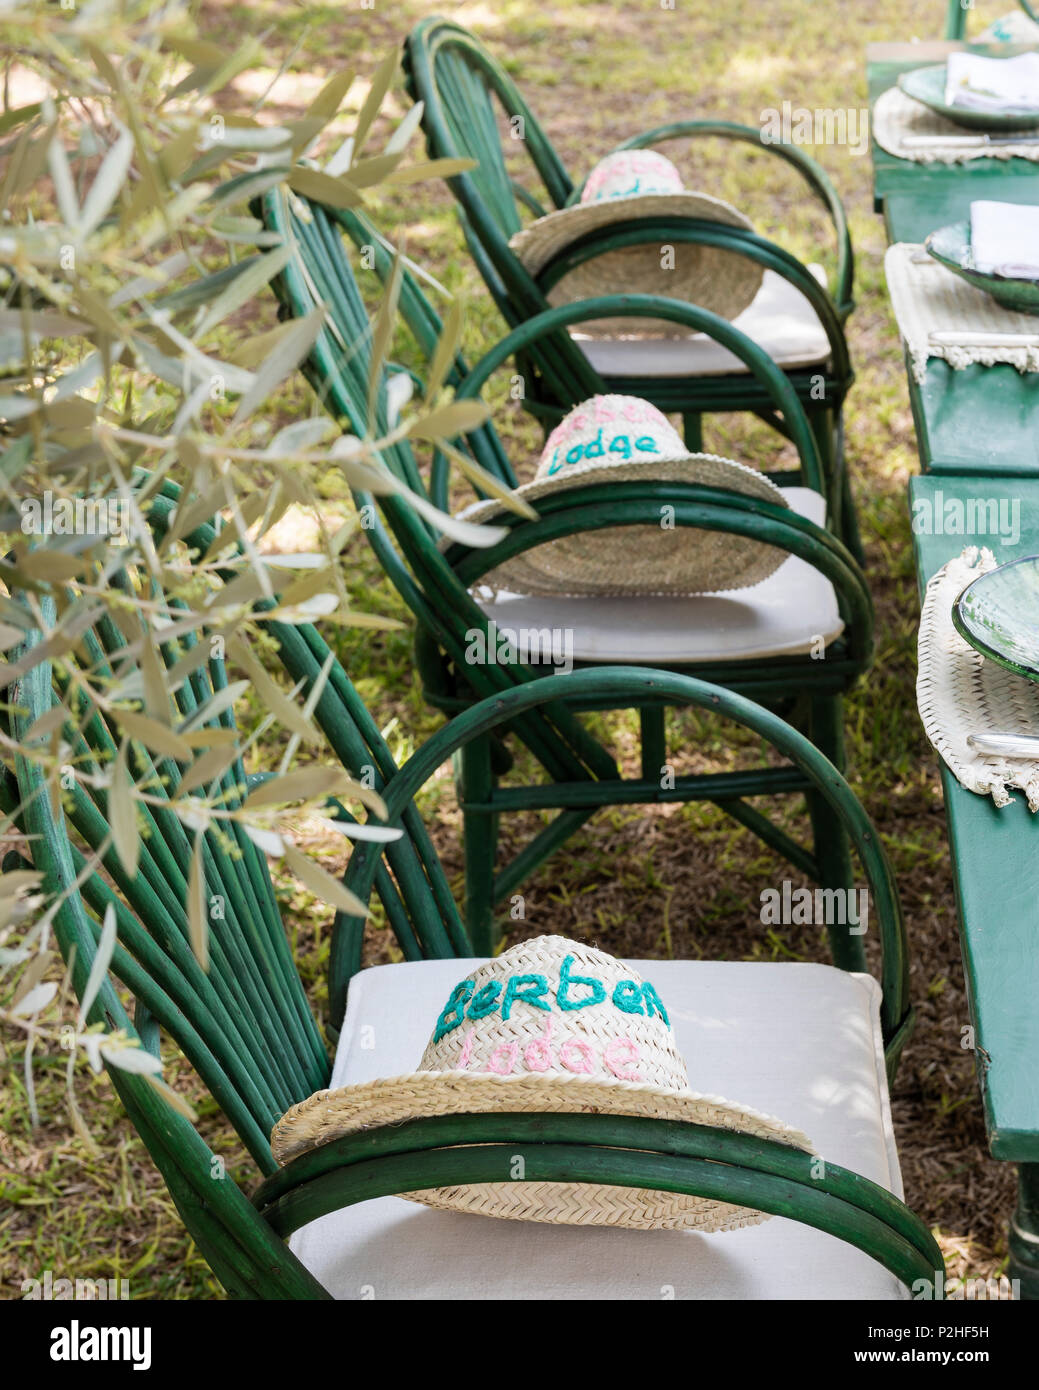 Berber Lodge straw hats on green chairs set at outdoor dining table Stock Photo